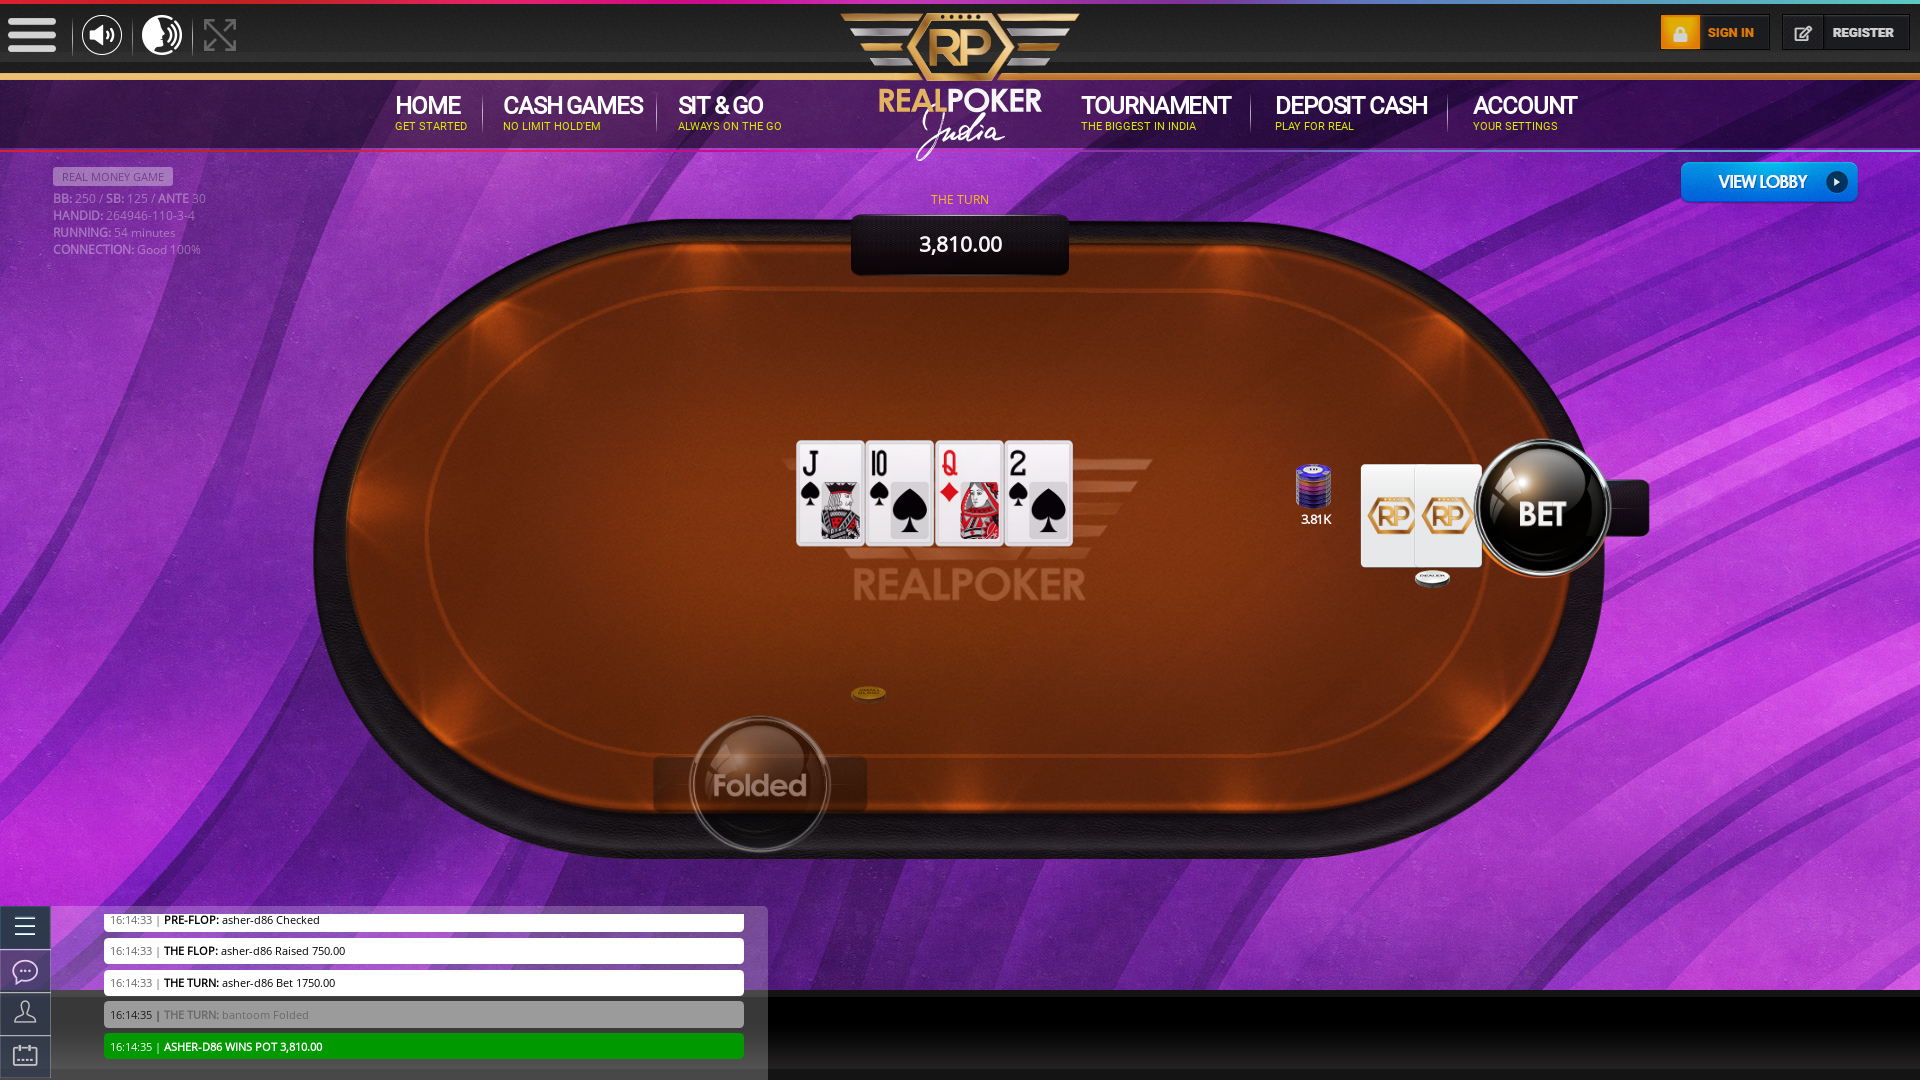 New Delhi 10 player poker in the 54th minute